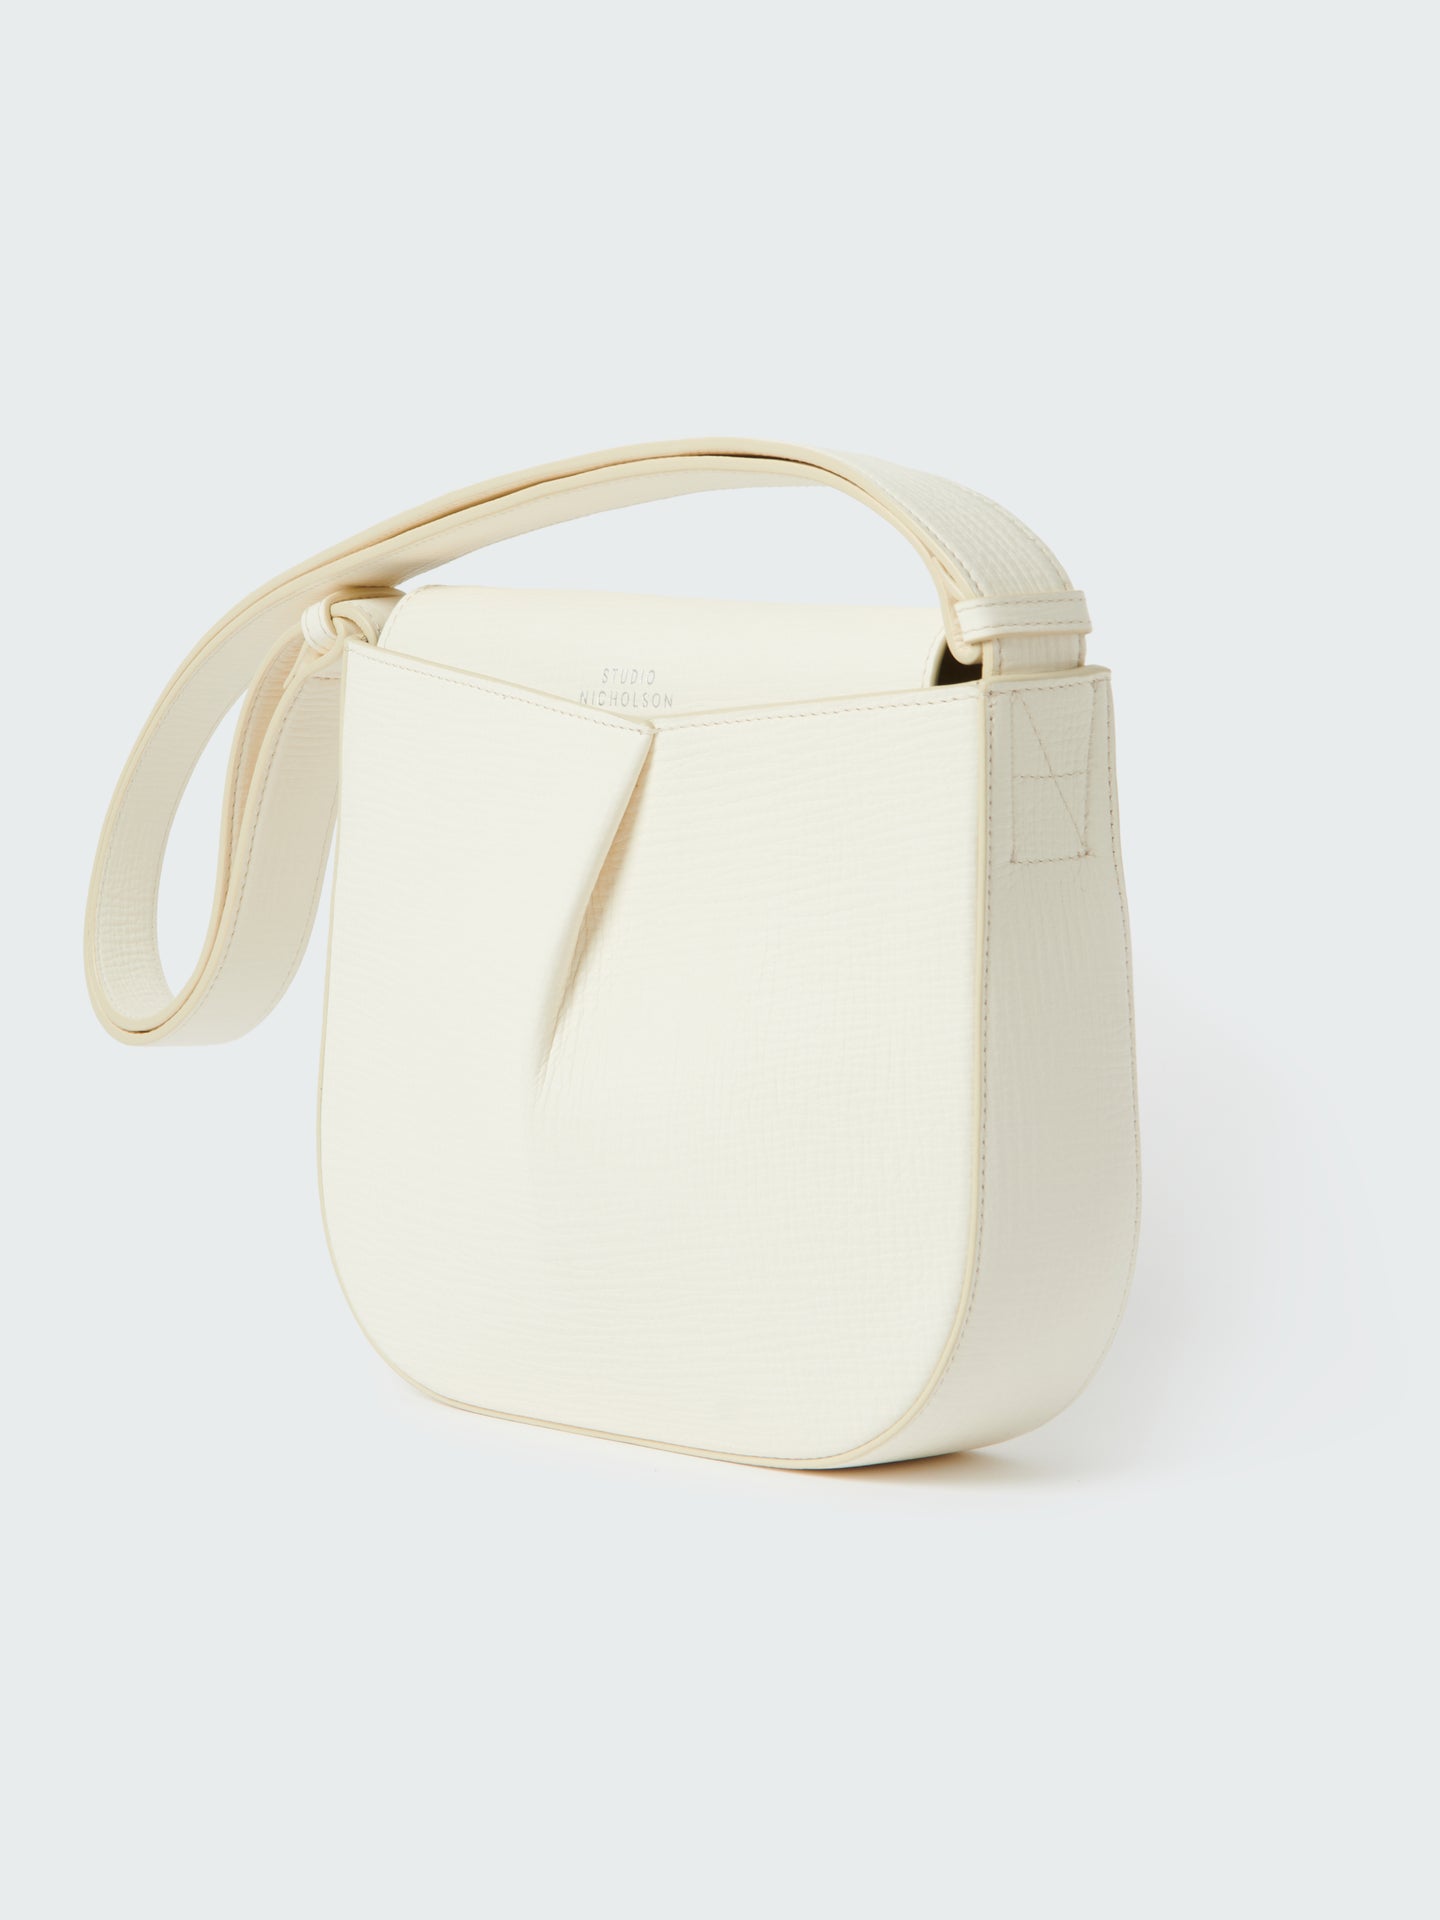 Fortuna Leather Bag in Parchment